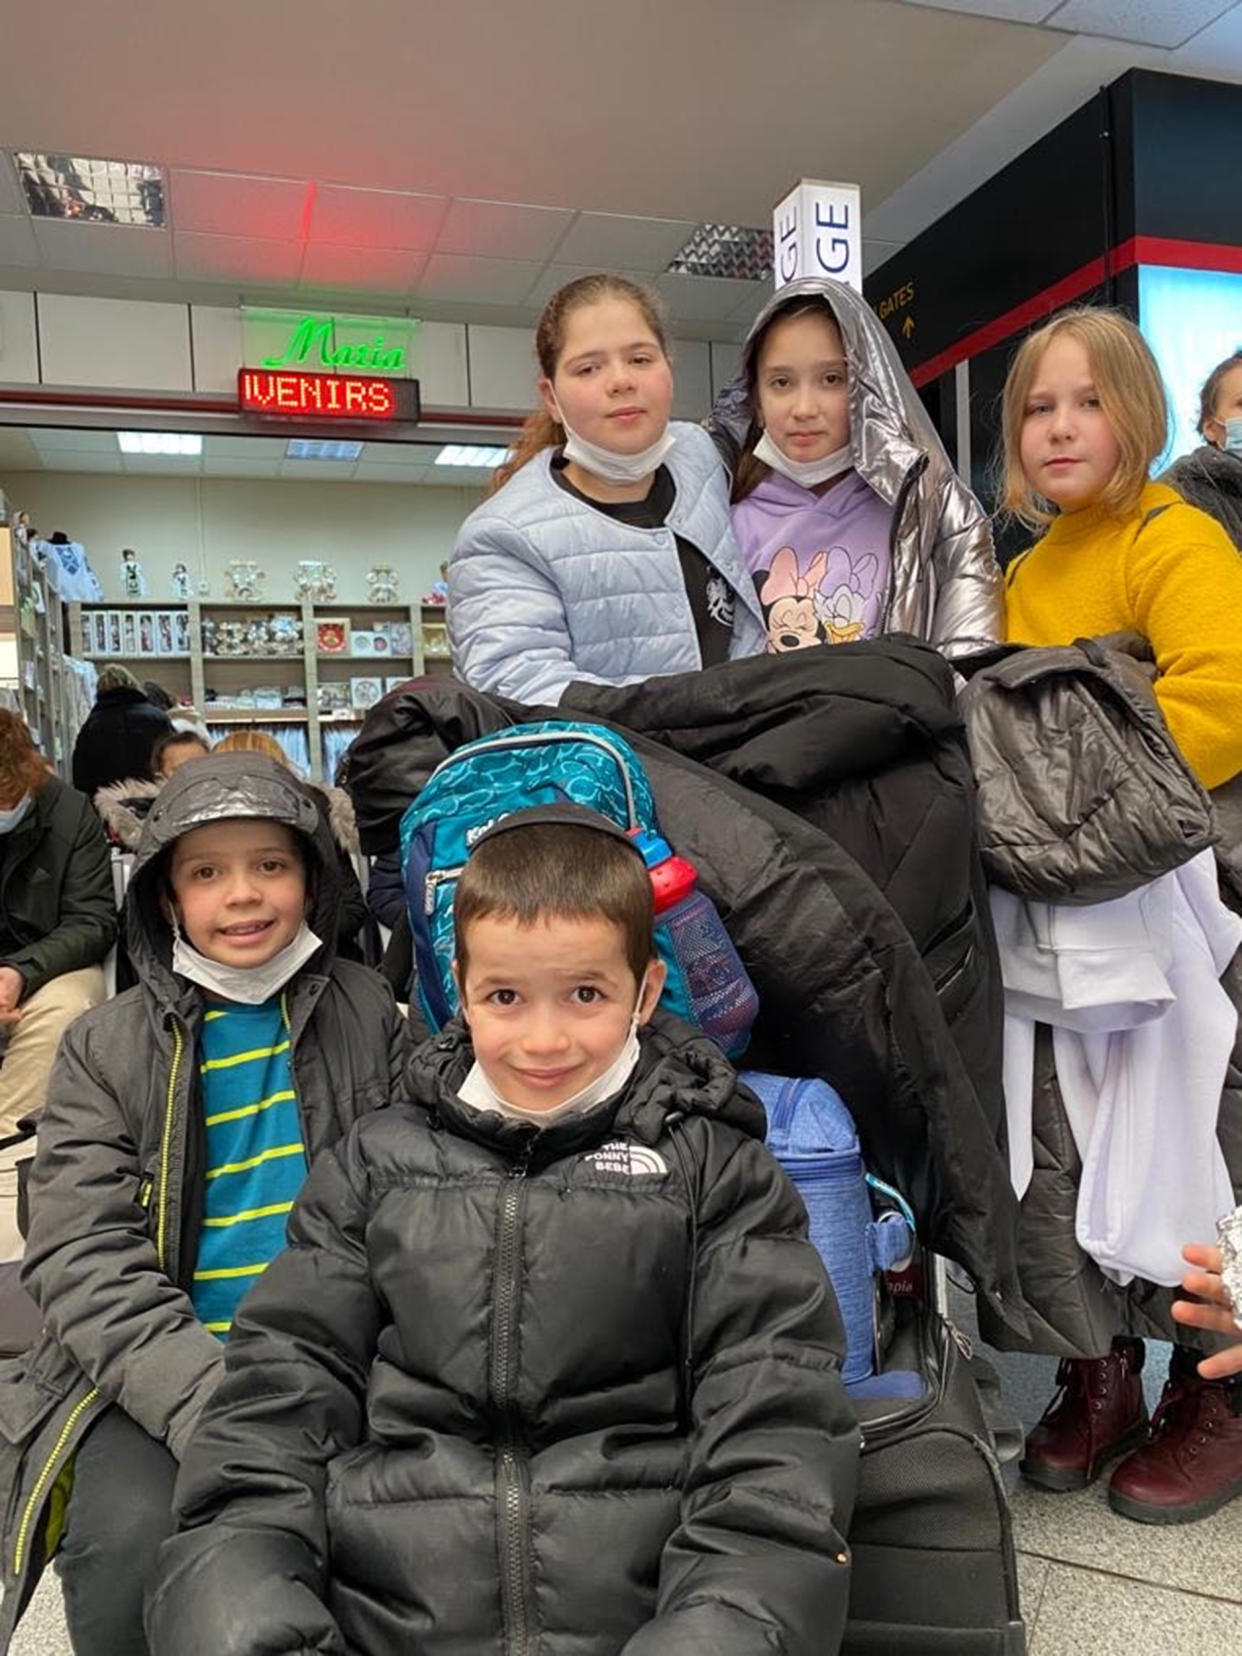 The children, pictured here, waiting to board a plane to Isreal. (Courtesy The International Fellowship of Christians and Jews)